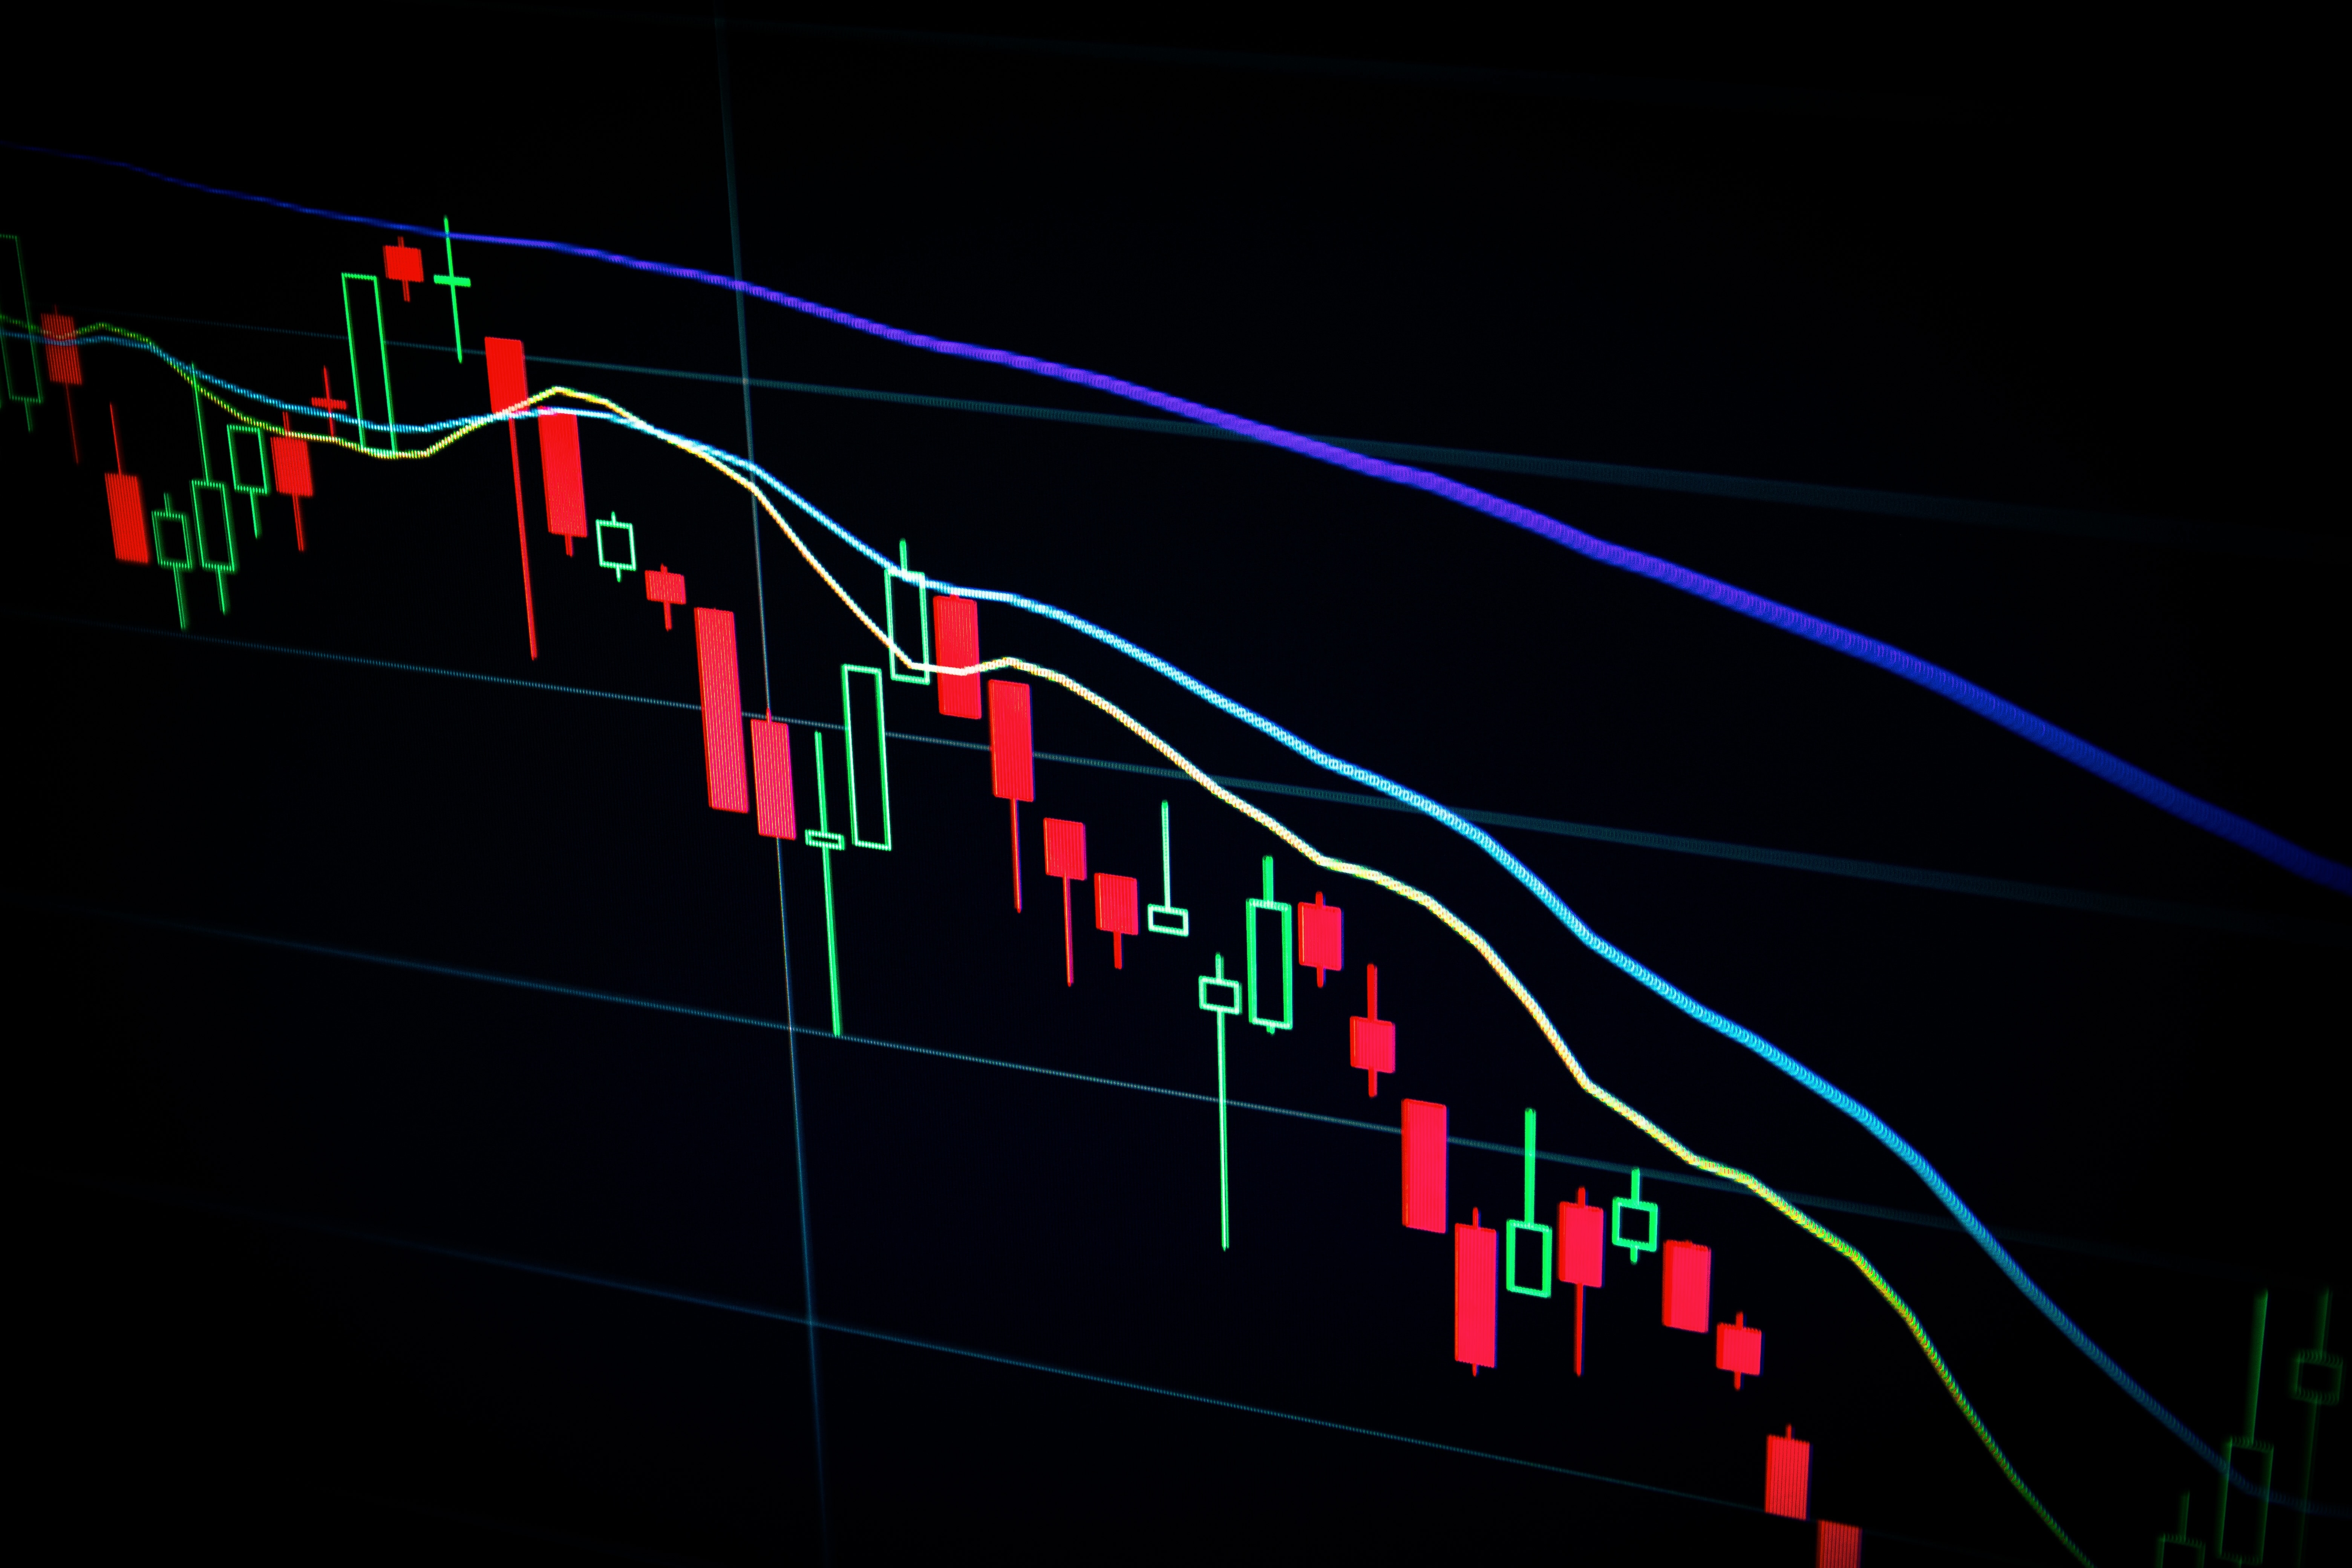 Will Bitcoin Retest $20,500 Again? This Pattern May Suggest So